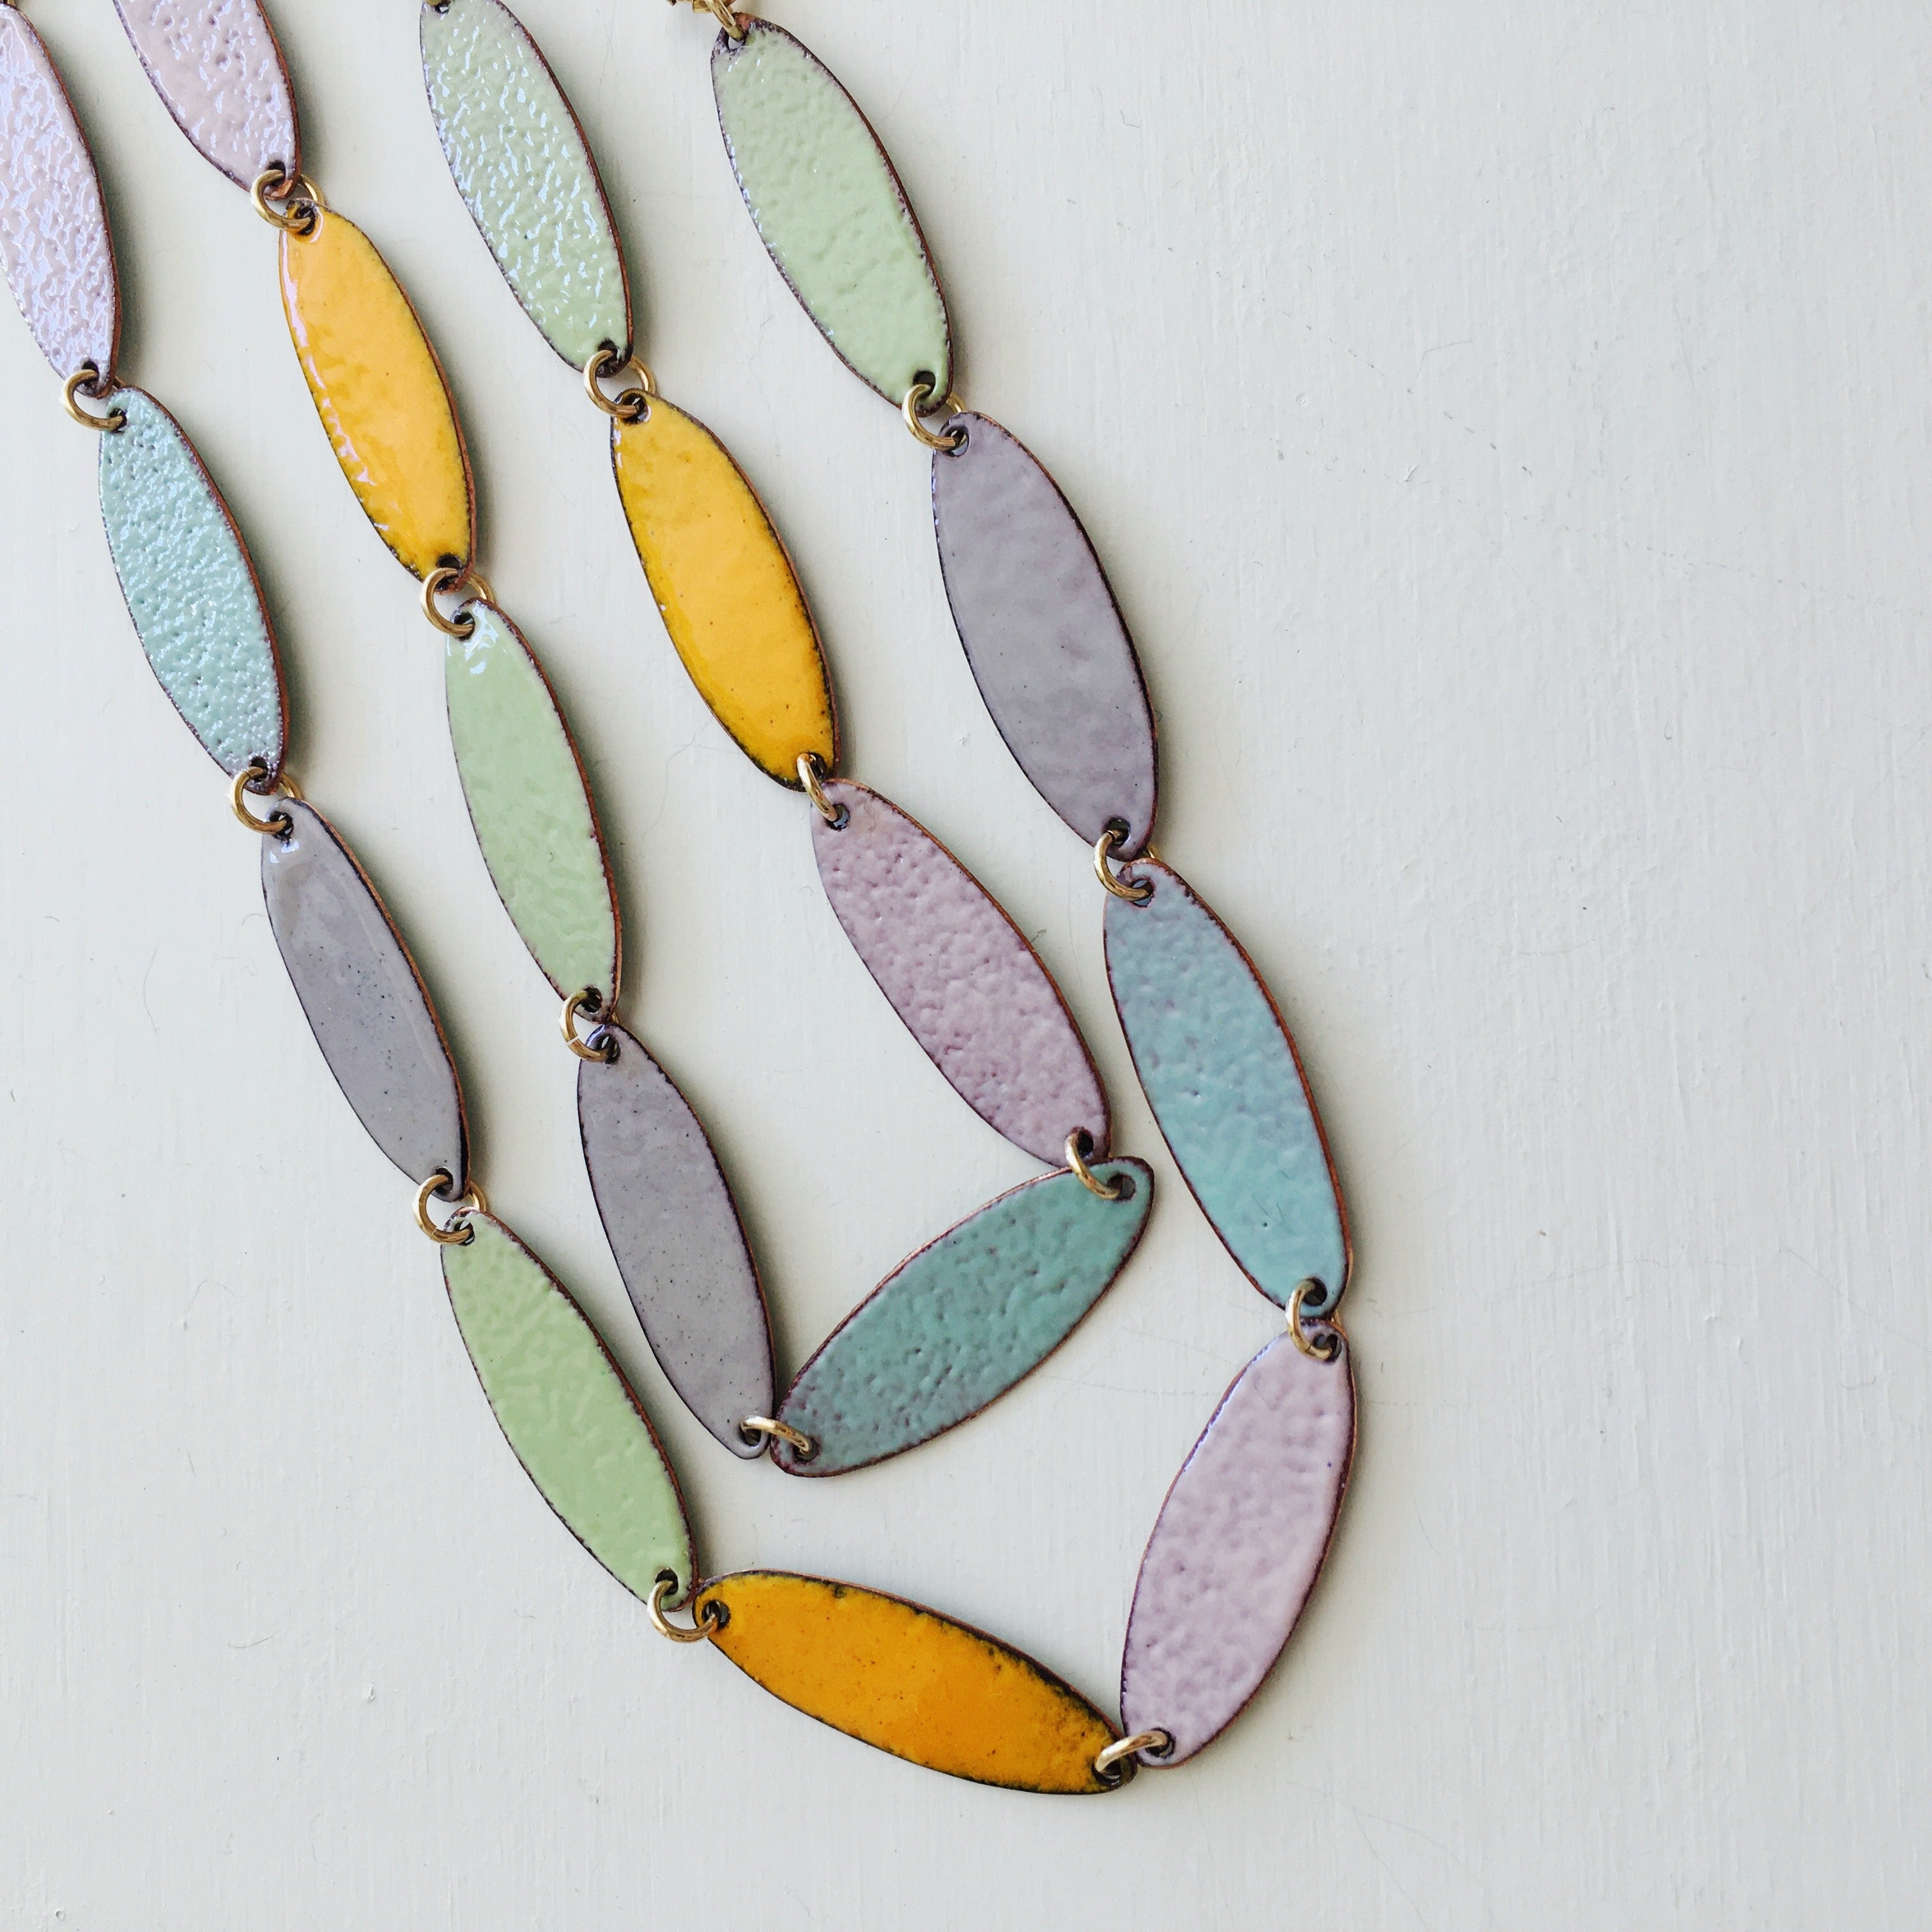 A one of a kind necklace in ellipse shapes of different pastel colors. Each piece is hand cut copper with glass enamel kiln fired on both sides.